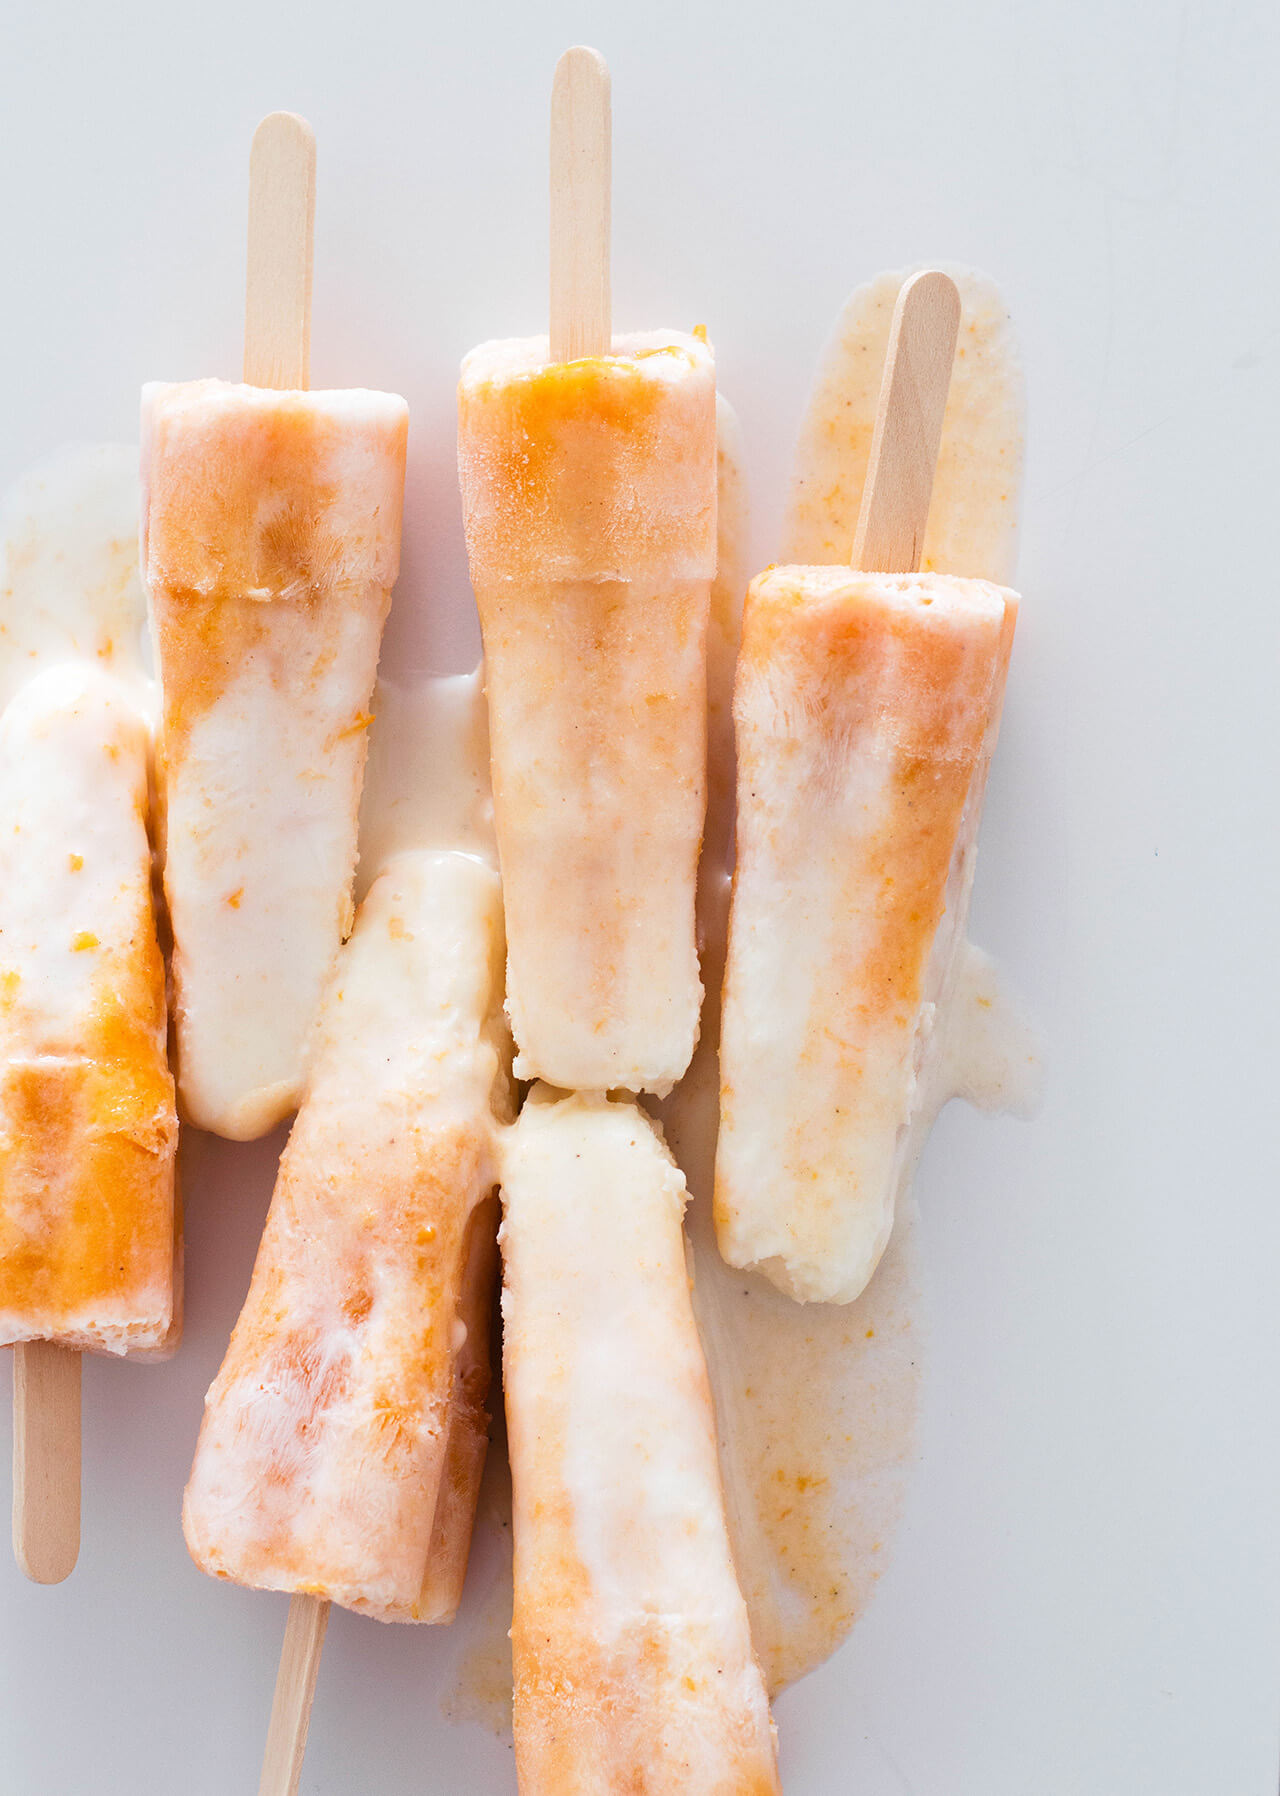 Super easy to make Elderflower apricot yogurt popsicles, that are creamy yet refreshing, sweet and tart, fruity with a floral note.